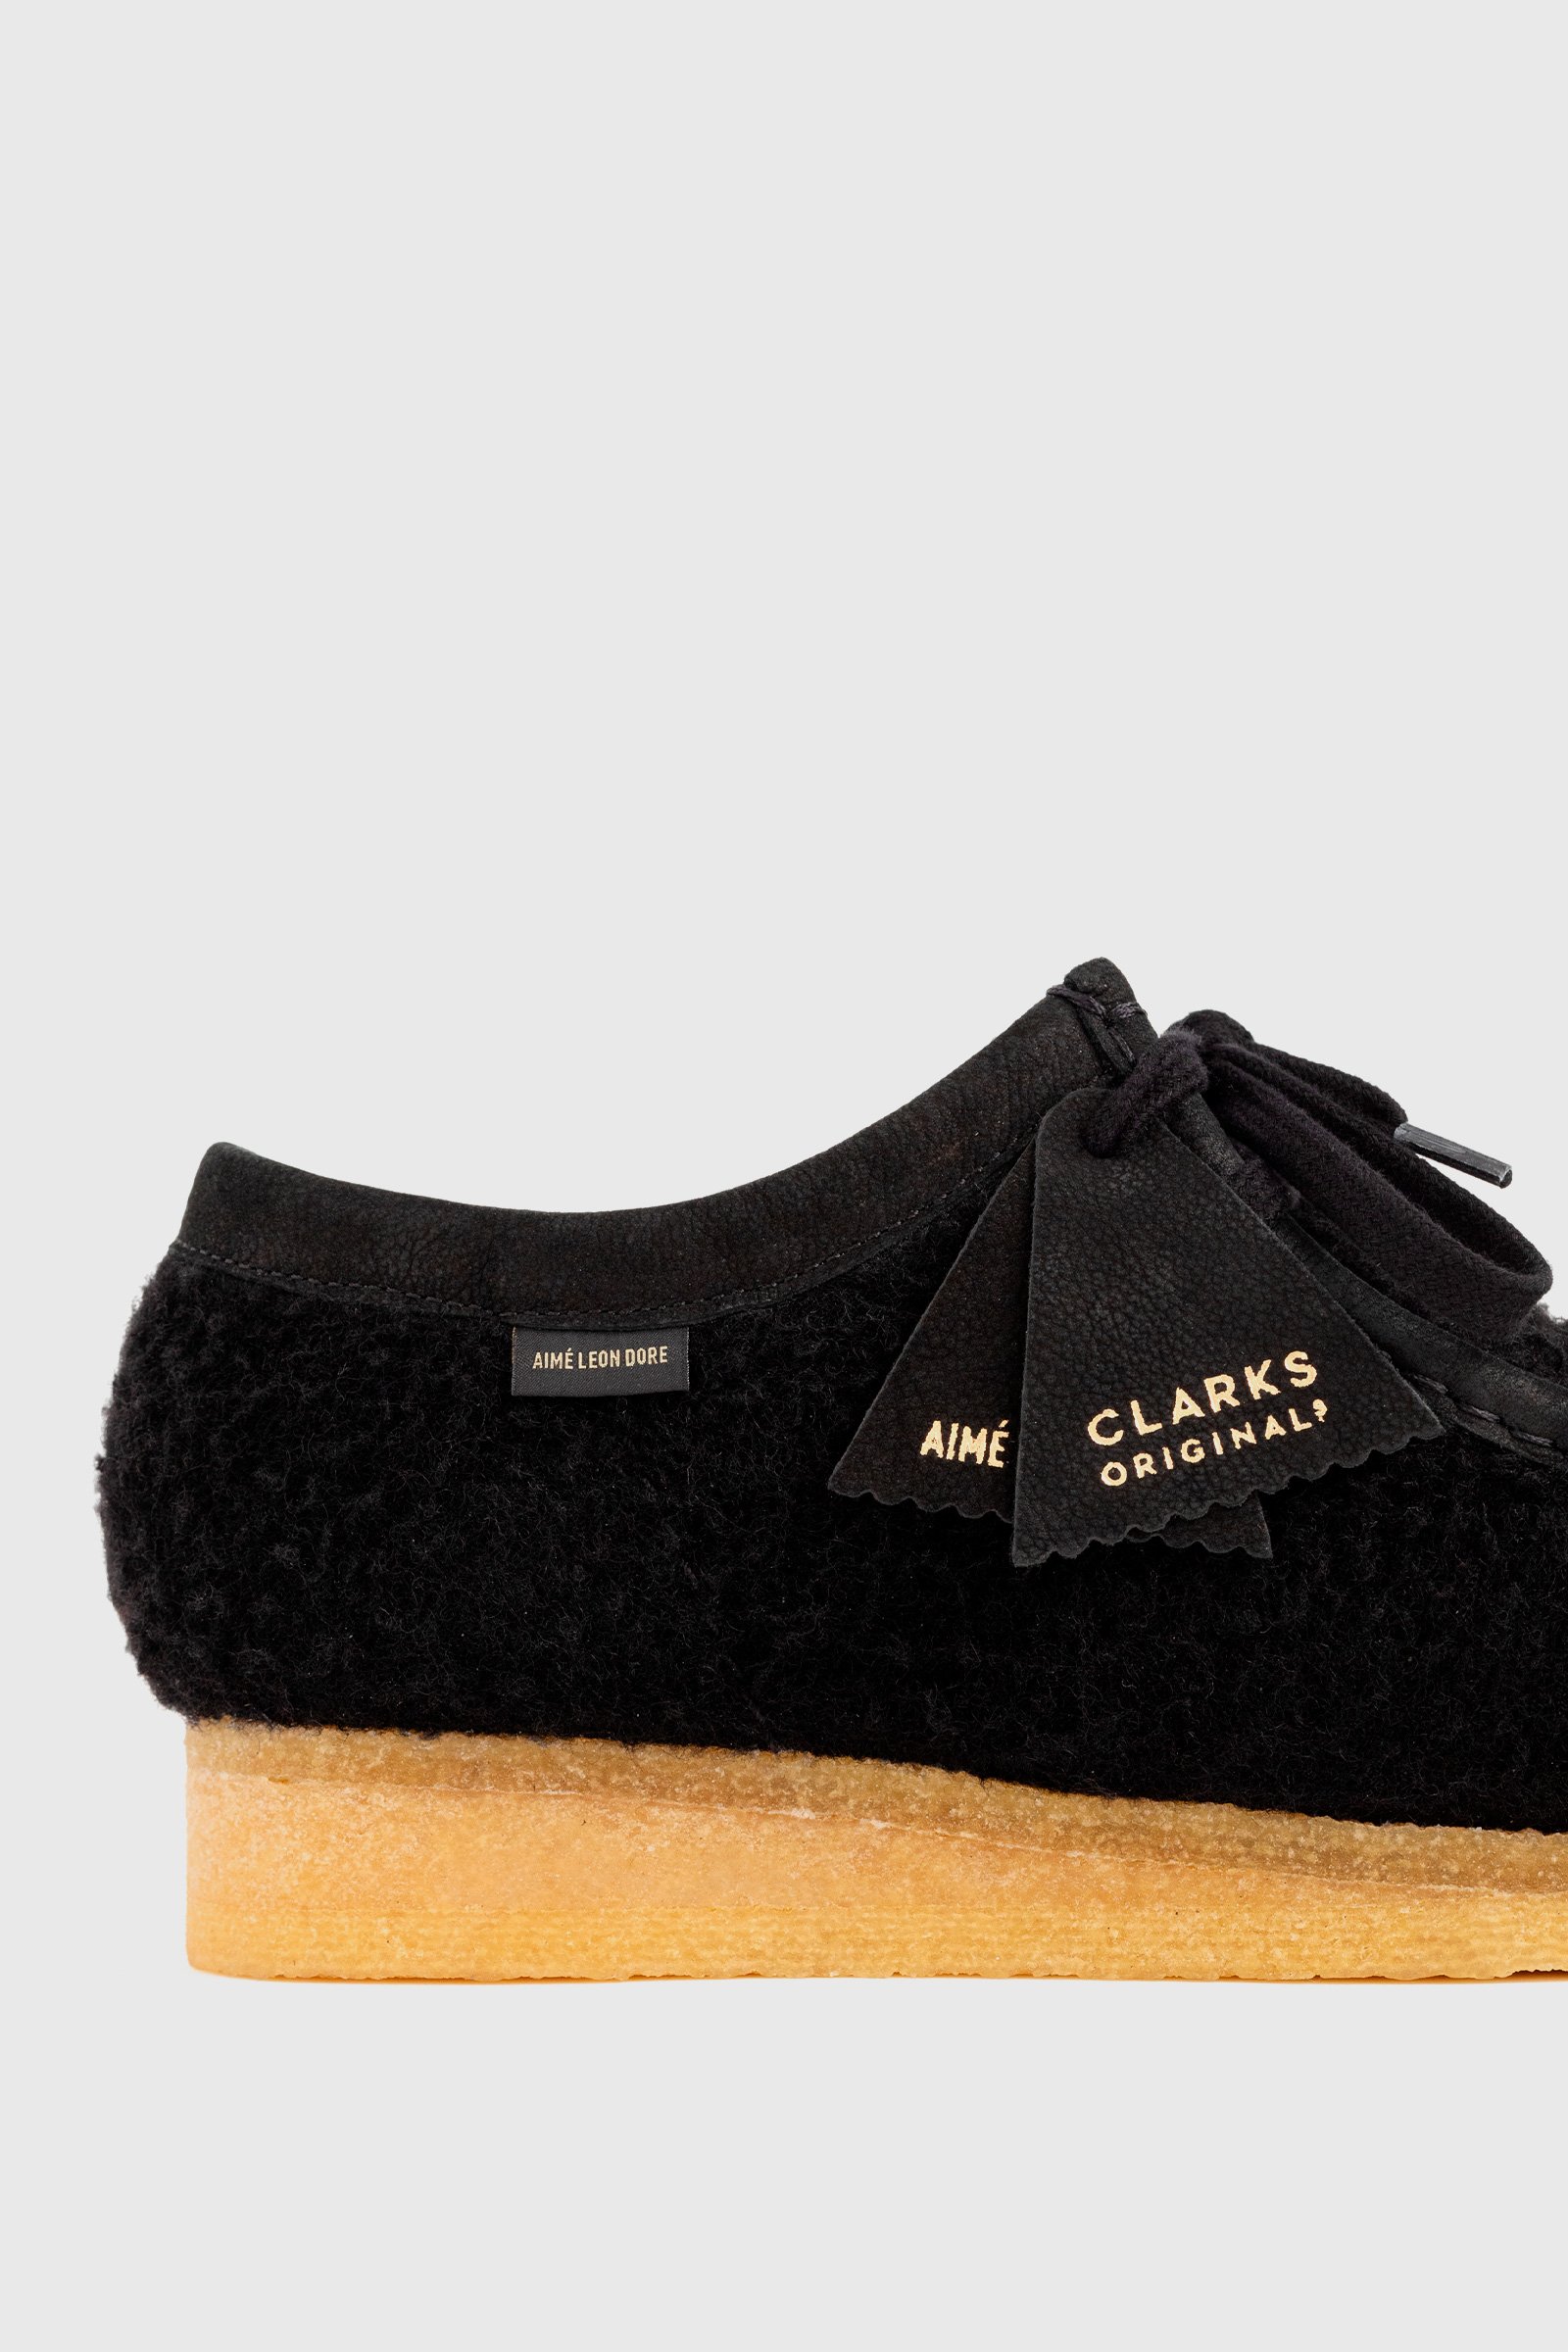 clarks and clarks